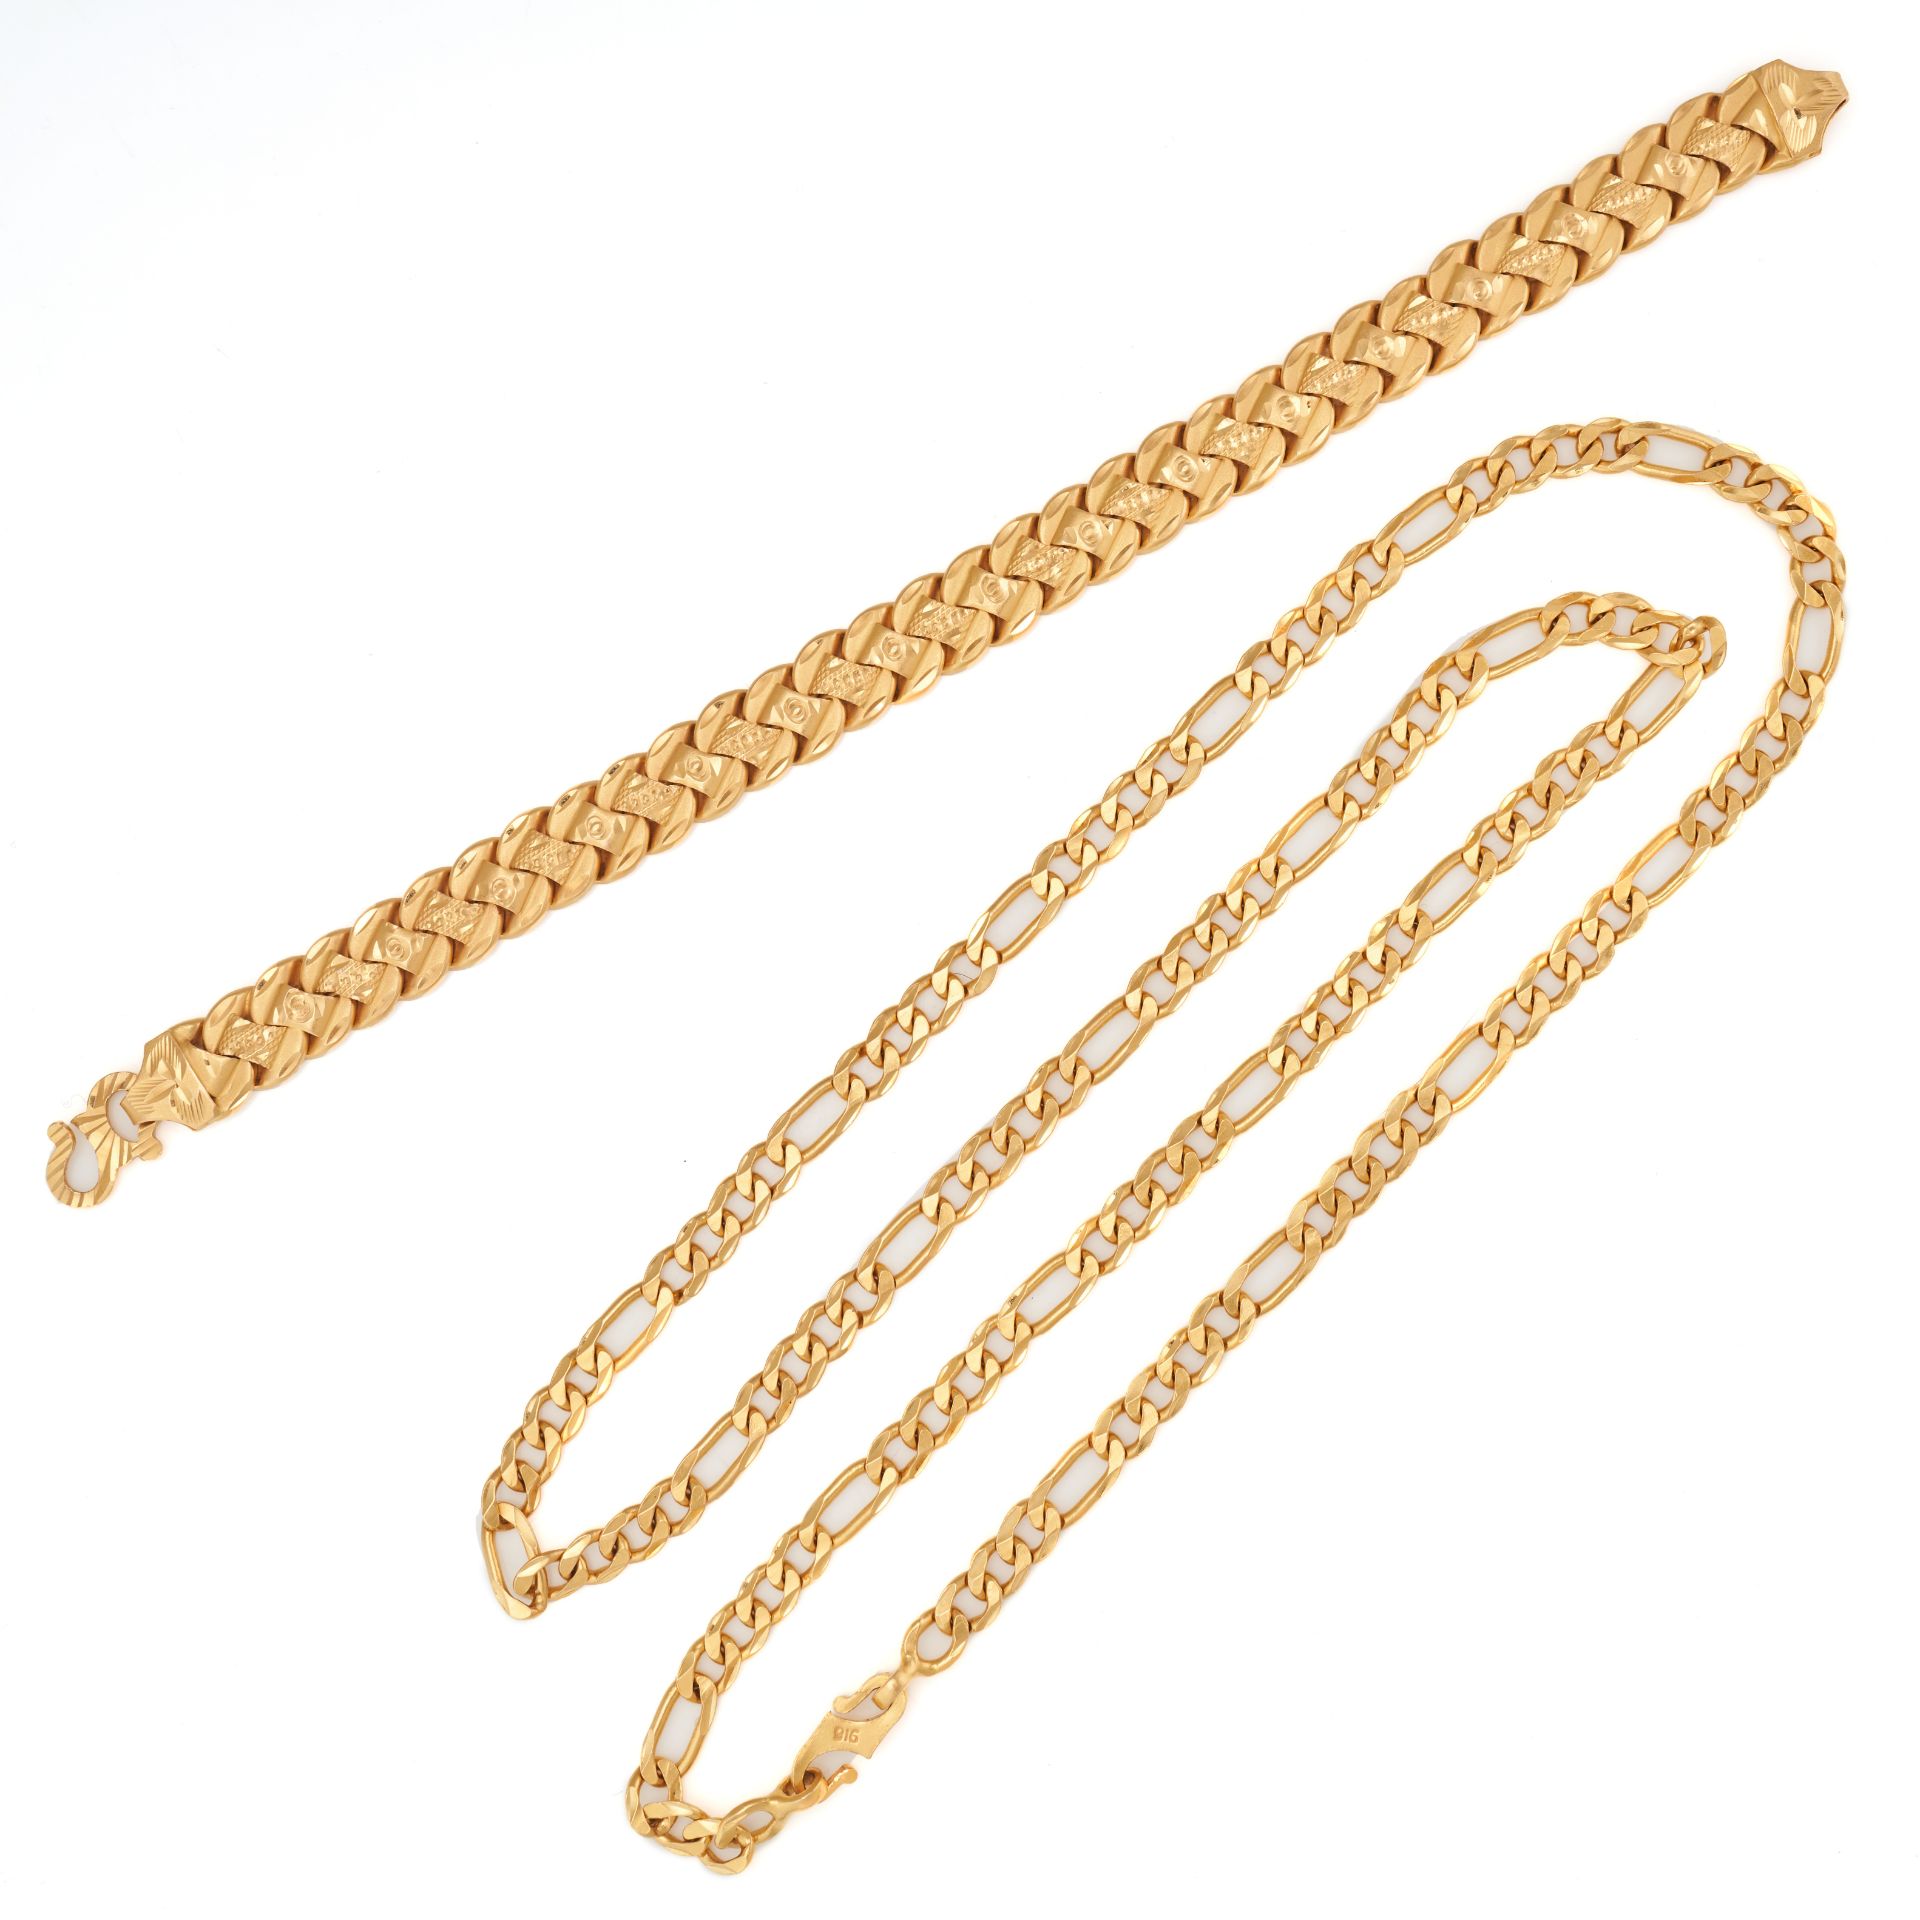 A GOLD CURB LINK CHAIN AND BRACELET in 22ct yellow gold, curb link necklace, bracelet with a patt...